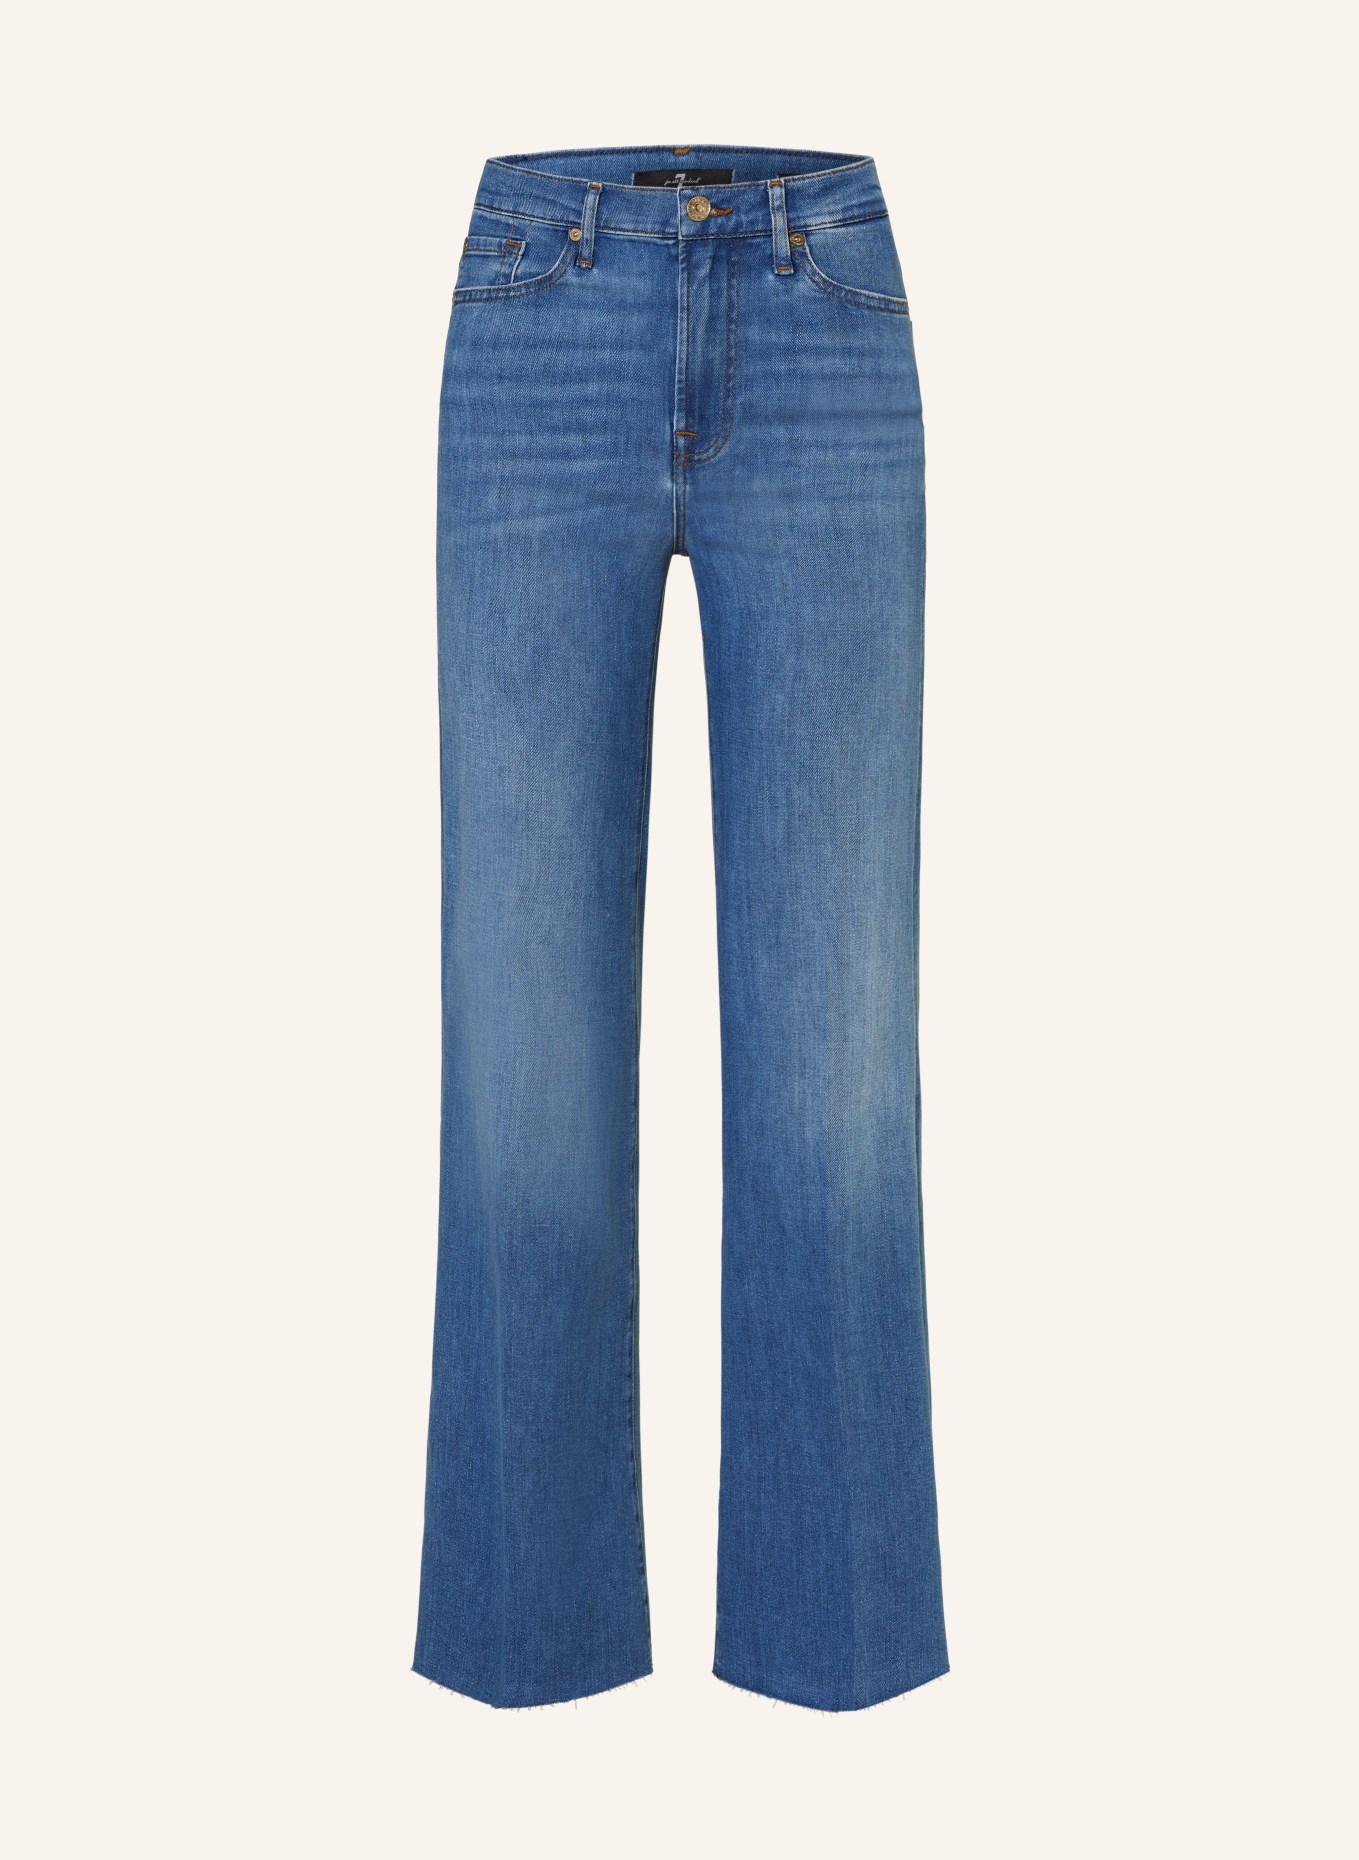 7 for all mankind Bootcut Jeans MODERN DOJO TAILORLESS, Farbe: MID BLUE (Bild 1)